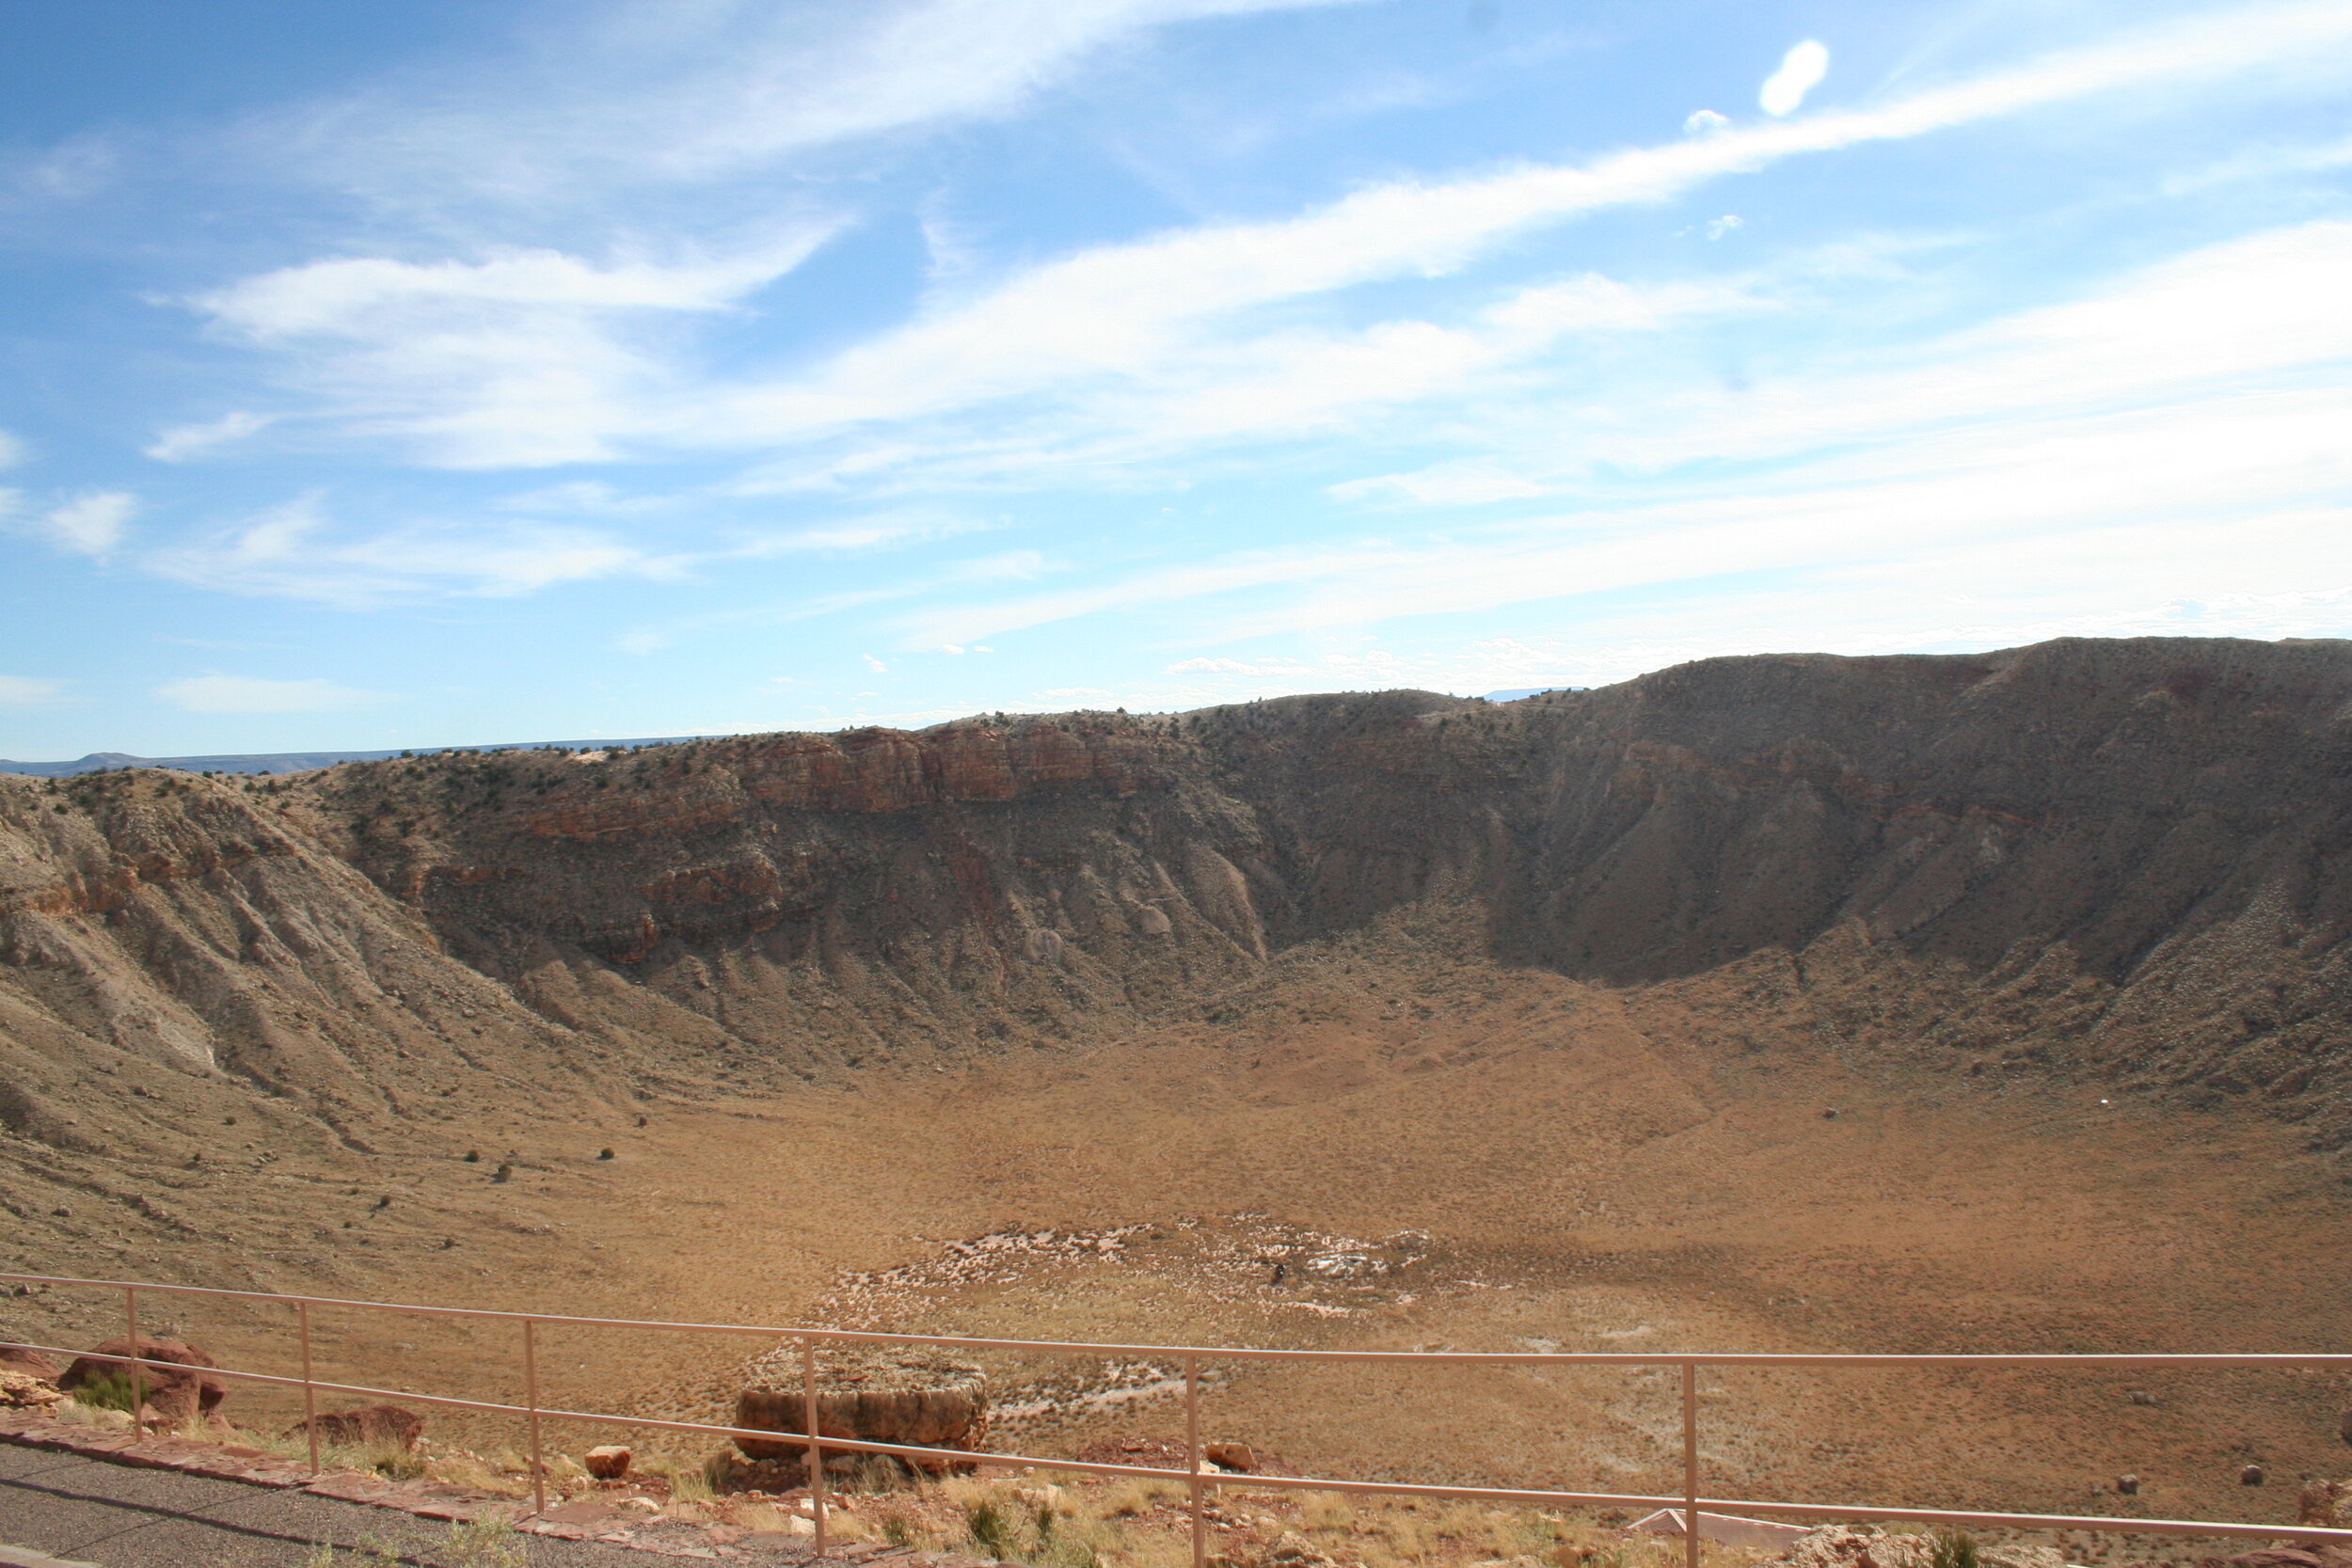   Looking into the wide Meteor Crater.  